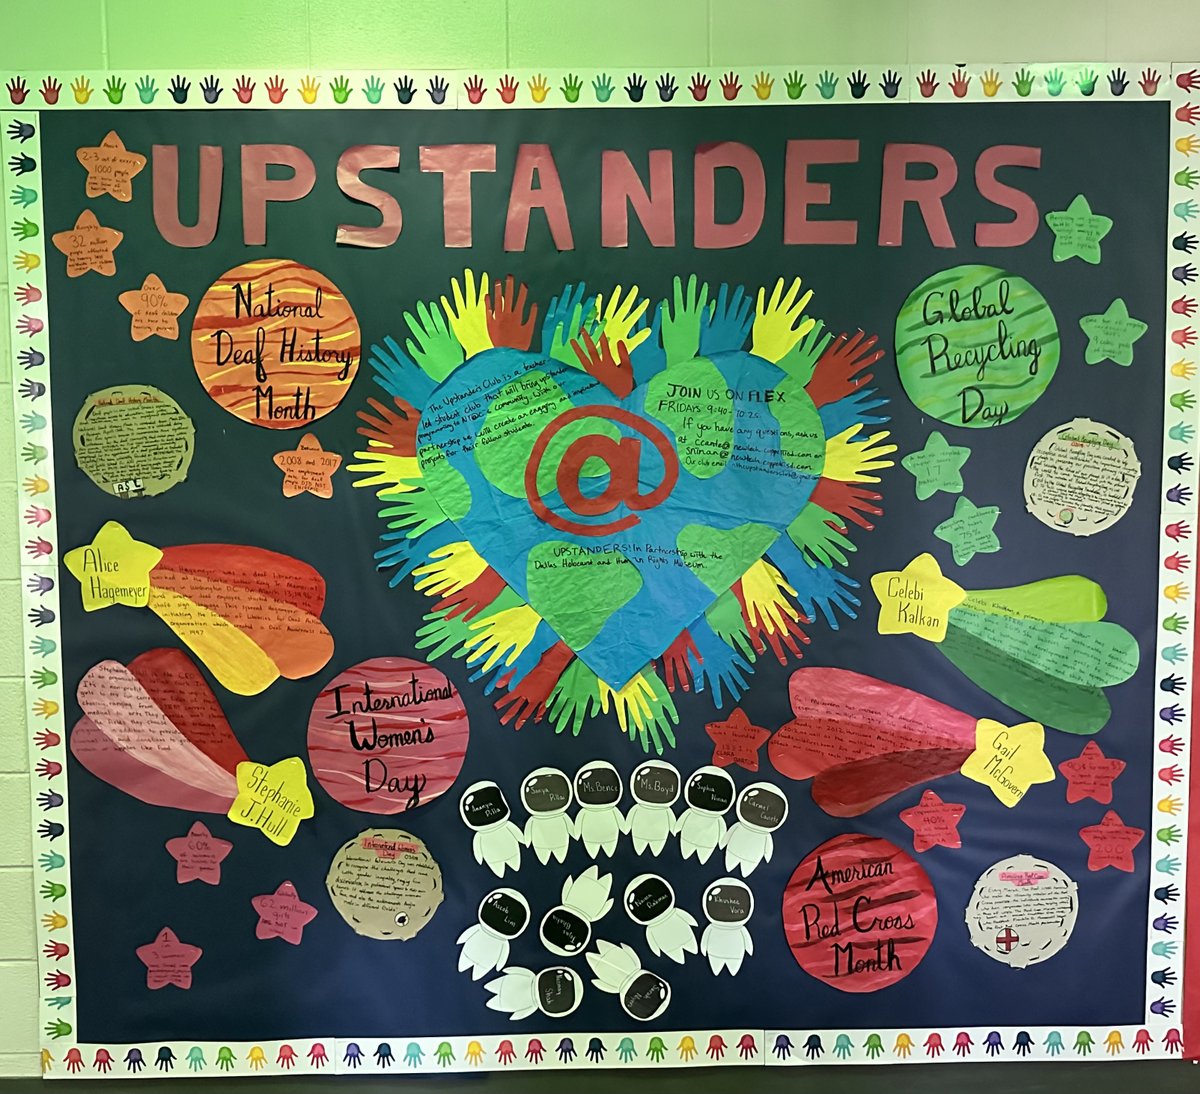 This month, the Upstanders Club is excited to celebrate and honor #RedCrossMonth, #InternationalWomensDay, #NationalDeafHistoryMonth, and #GlobalRecyclingDay! Look out for more information about each day and stop by the 100s hall to see the bulletin board!